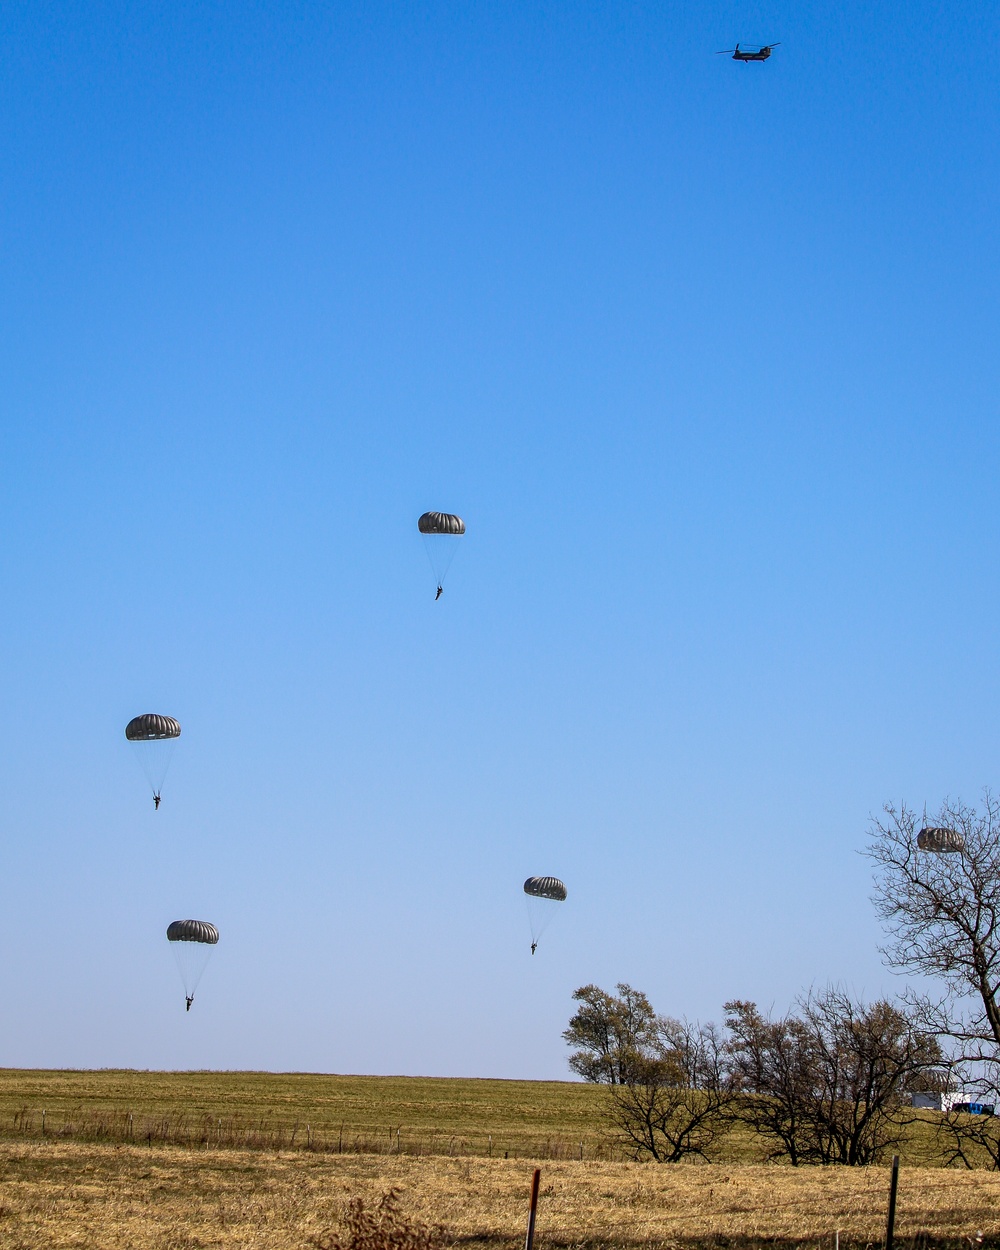 First 2-134th Infantry Airborne Exercise